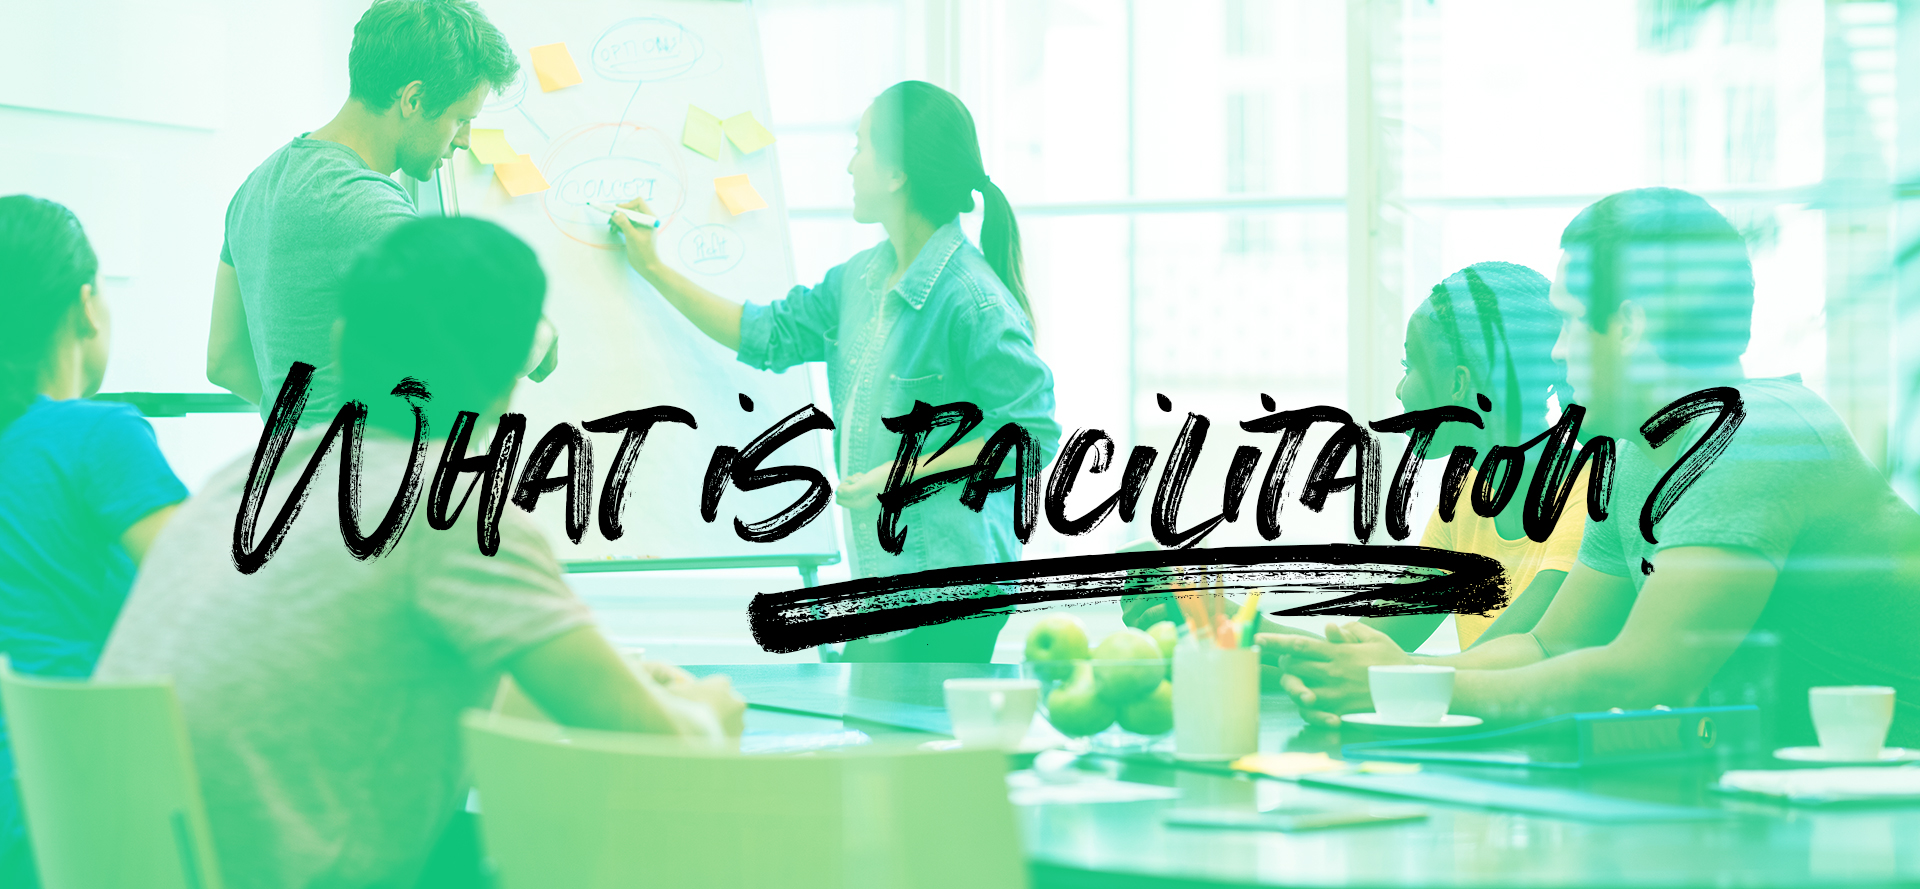 What is facilitation?